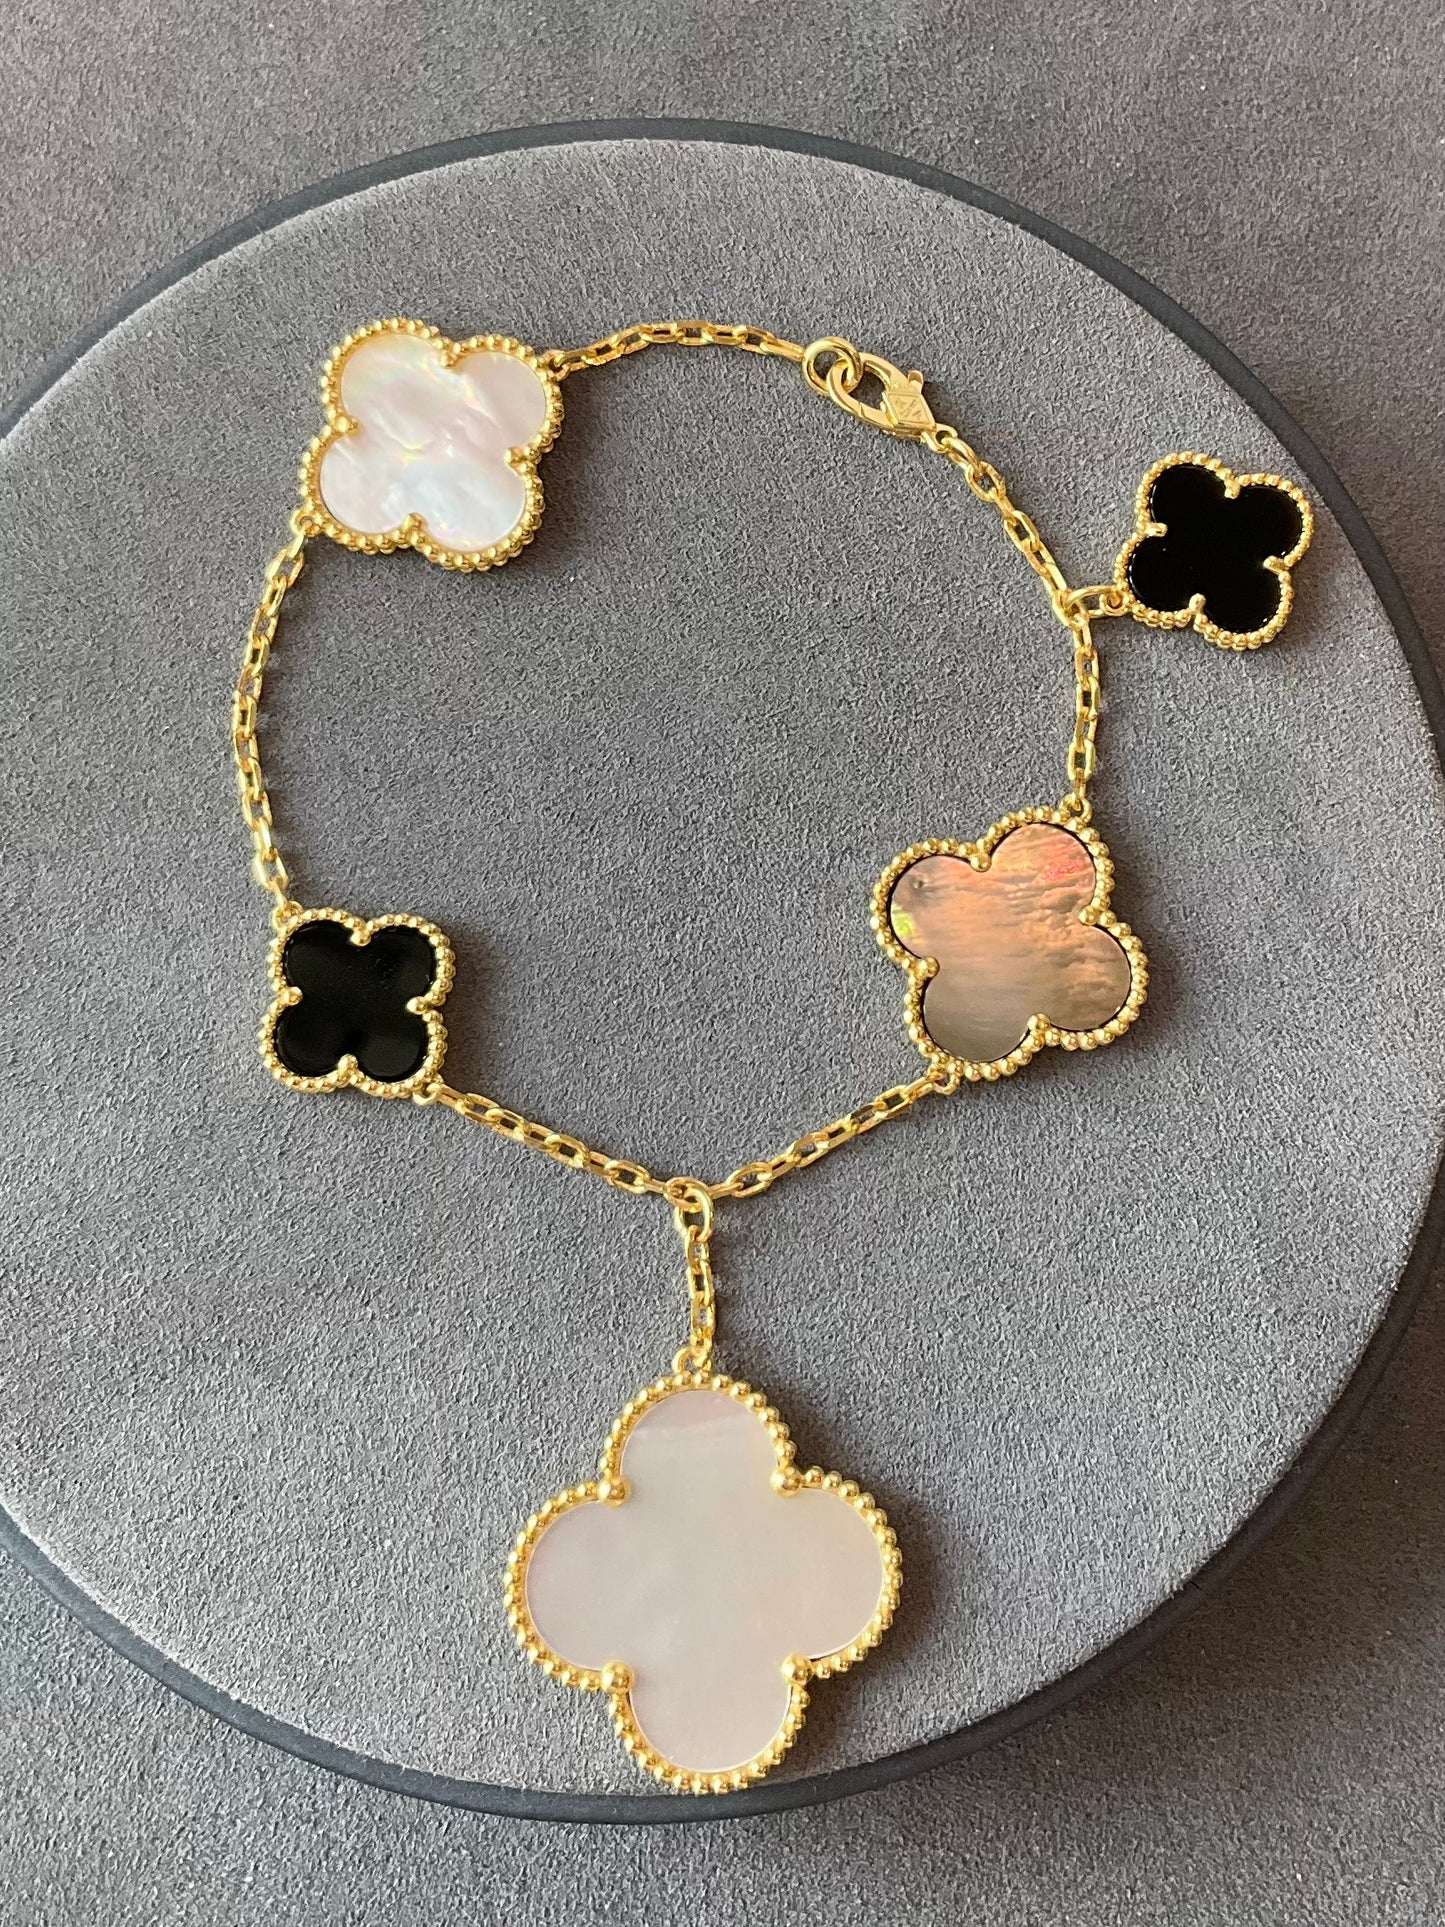 Mother of Pearl onyx Charm clover bracelet 925 silver 18k gold plated 7.5 inches - ParadiseKissCo